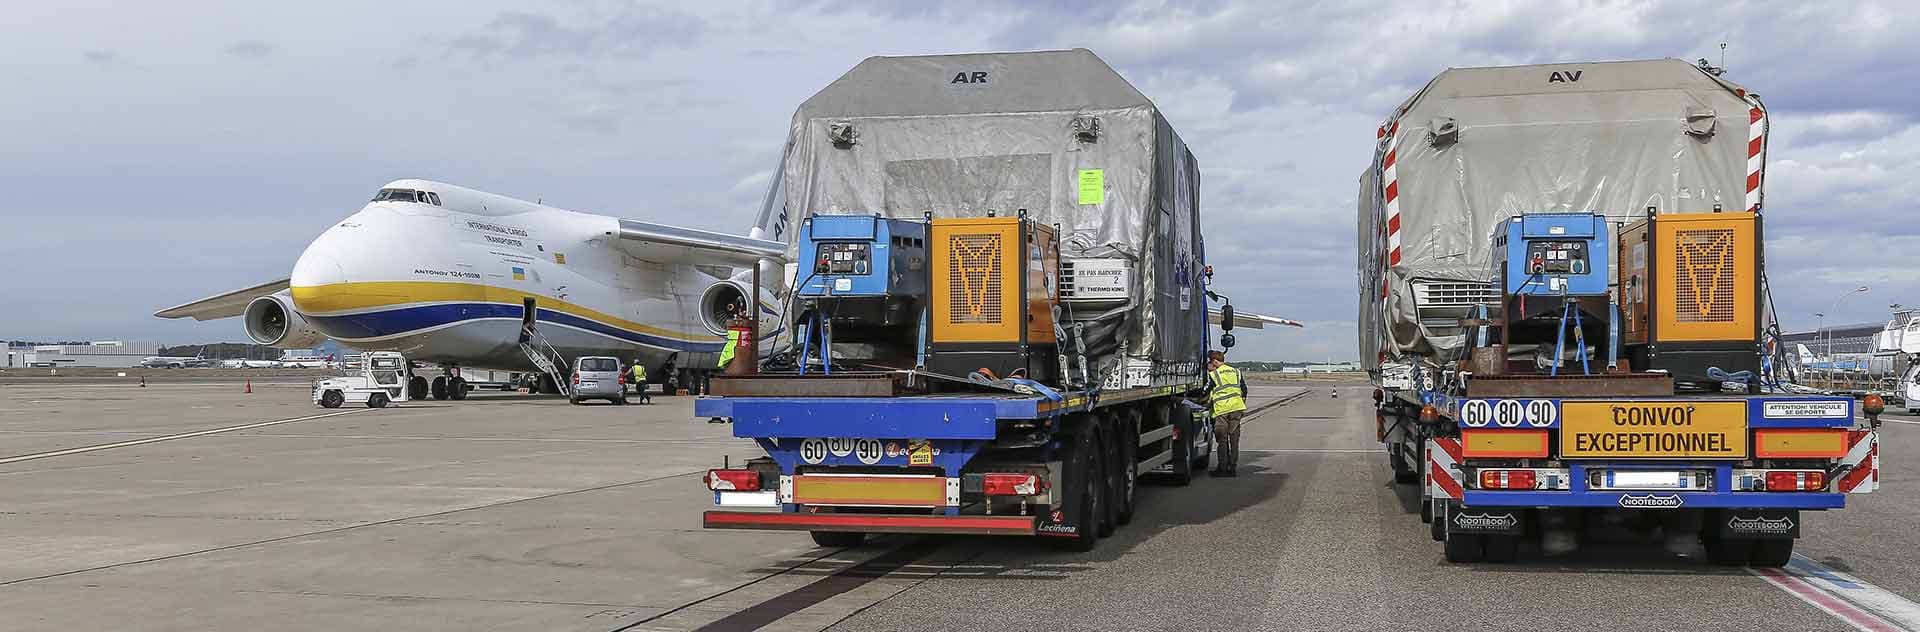 The Final Two Pléiades Neo Satellites Arrive in Kourou for Launch